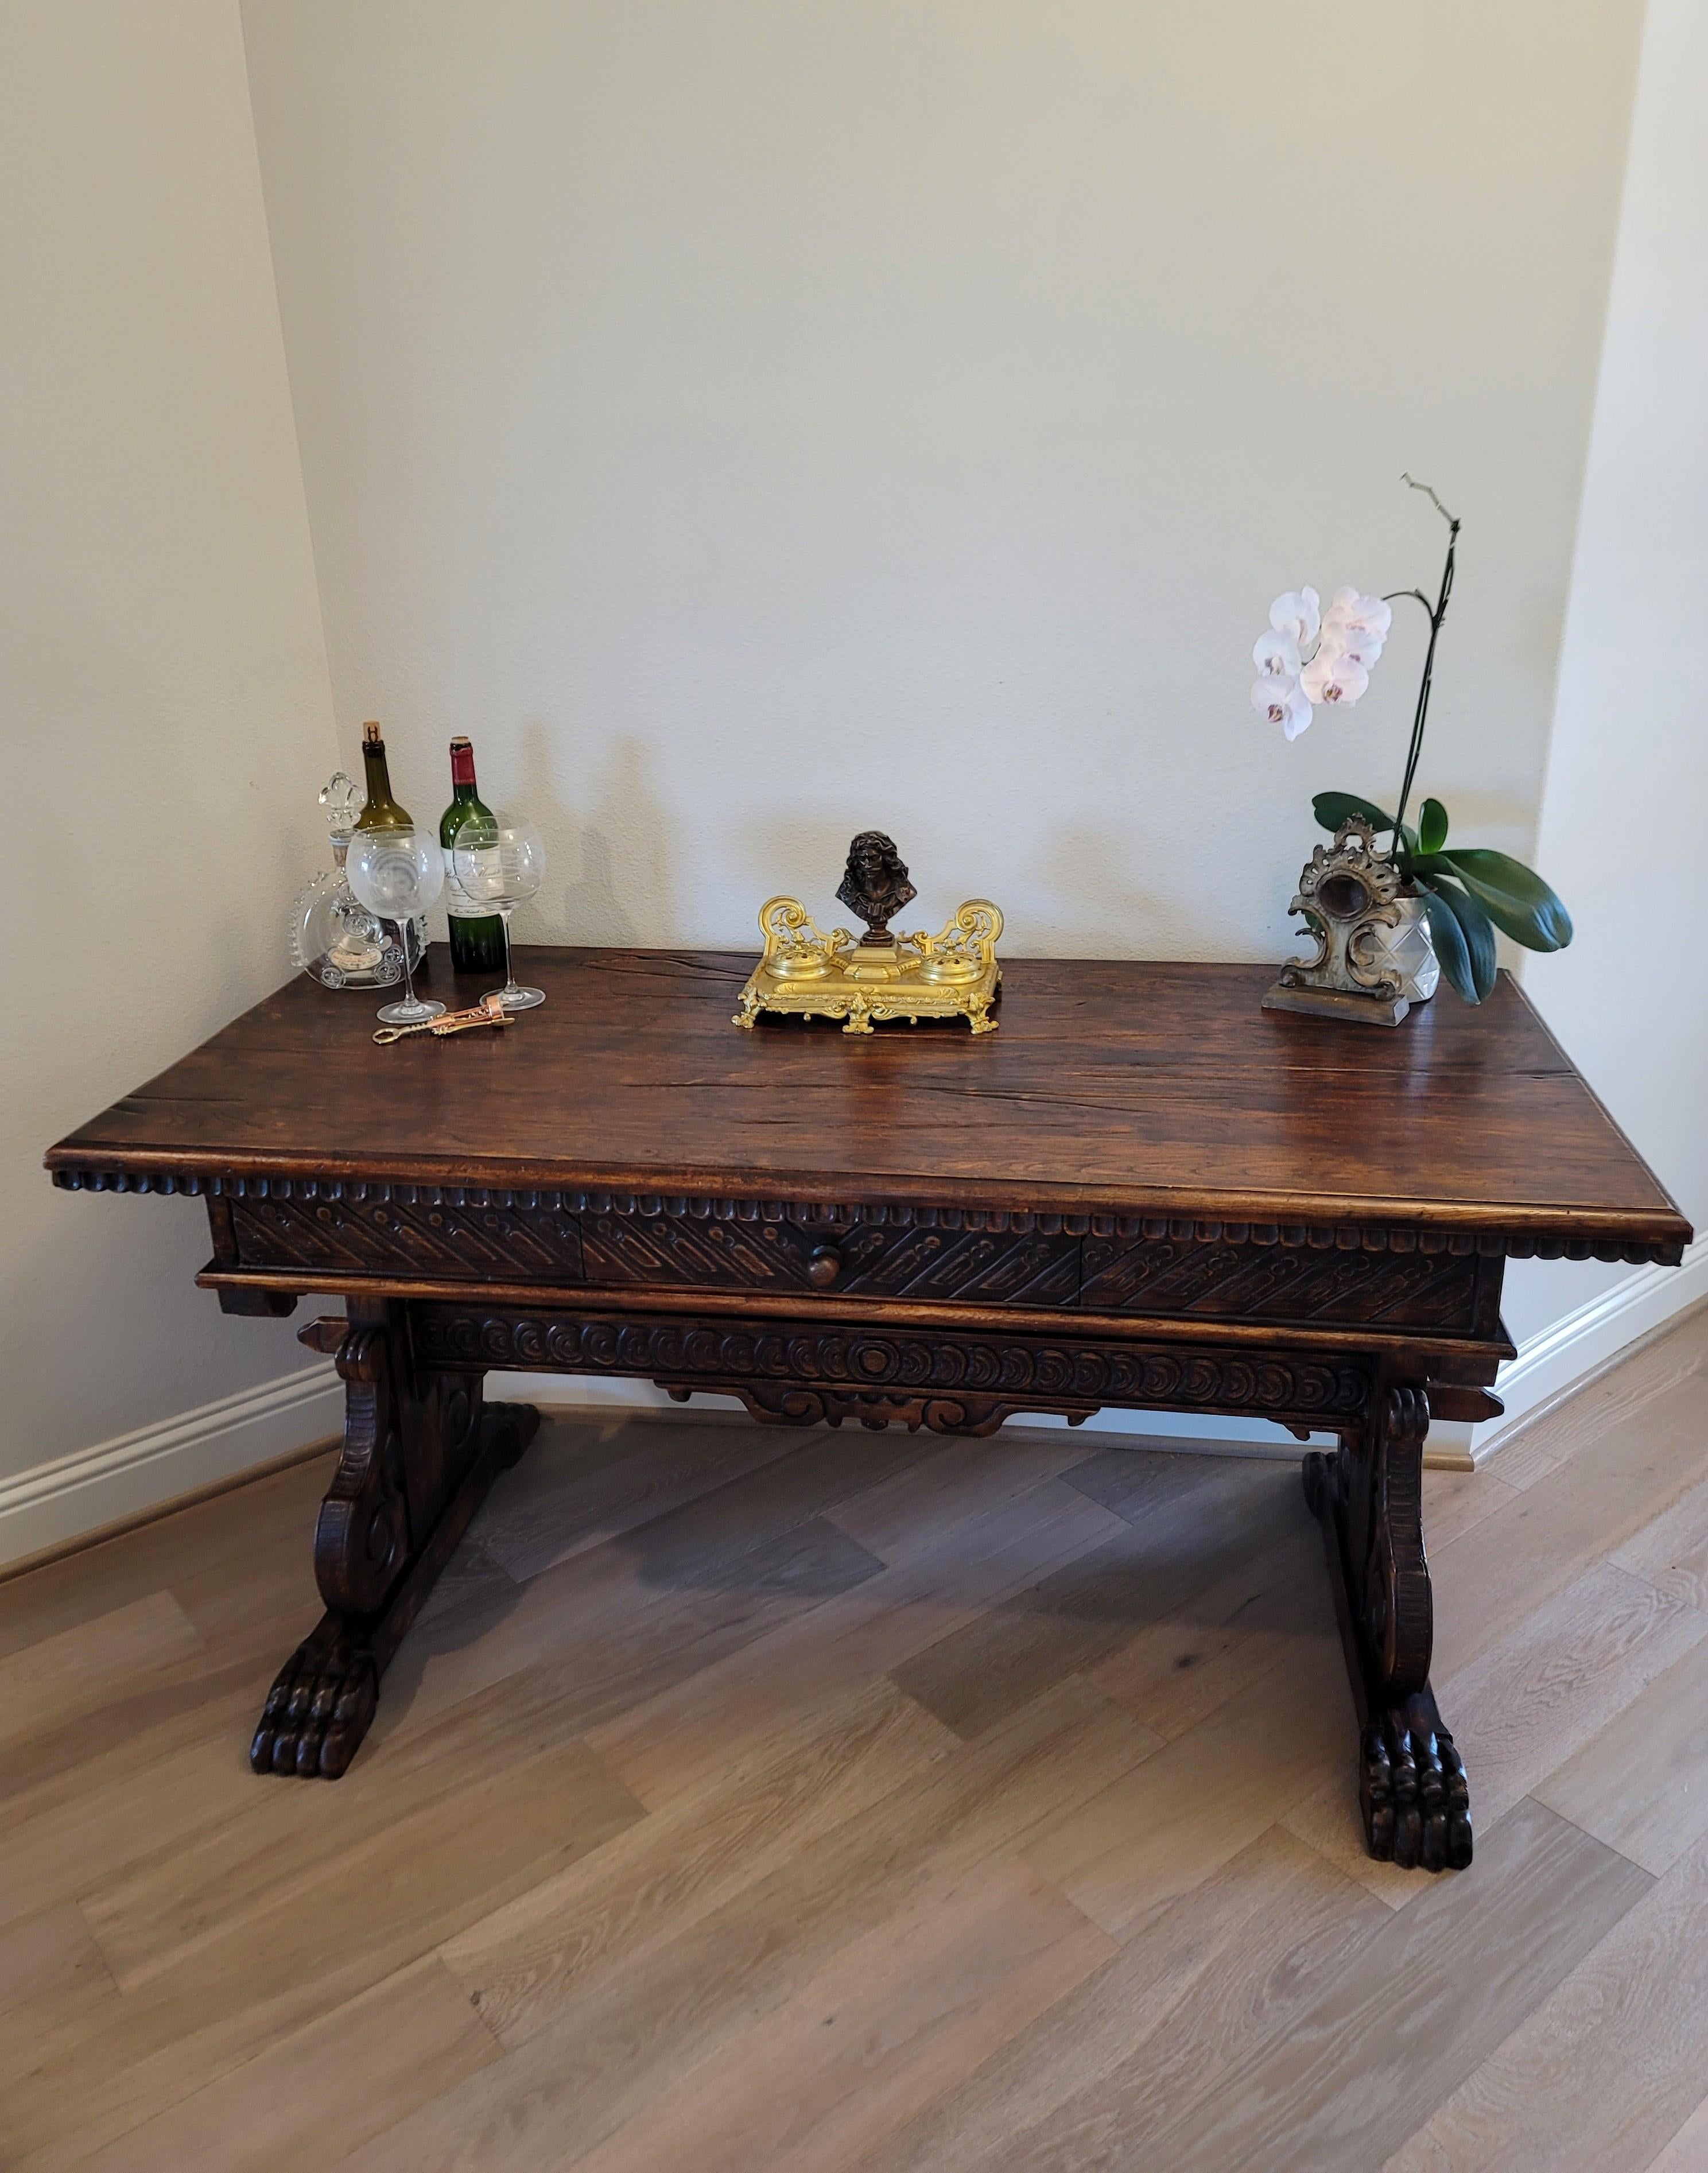 A most distinctive antique, circa 1870, Portuguese Renaissance Revival carved walnut trestle table with beautifully aged warm, rich dark patina!

Born in Portugal during the second half of the 19th century, featuring impressive Iberian peninsula